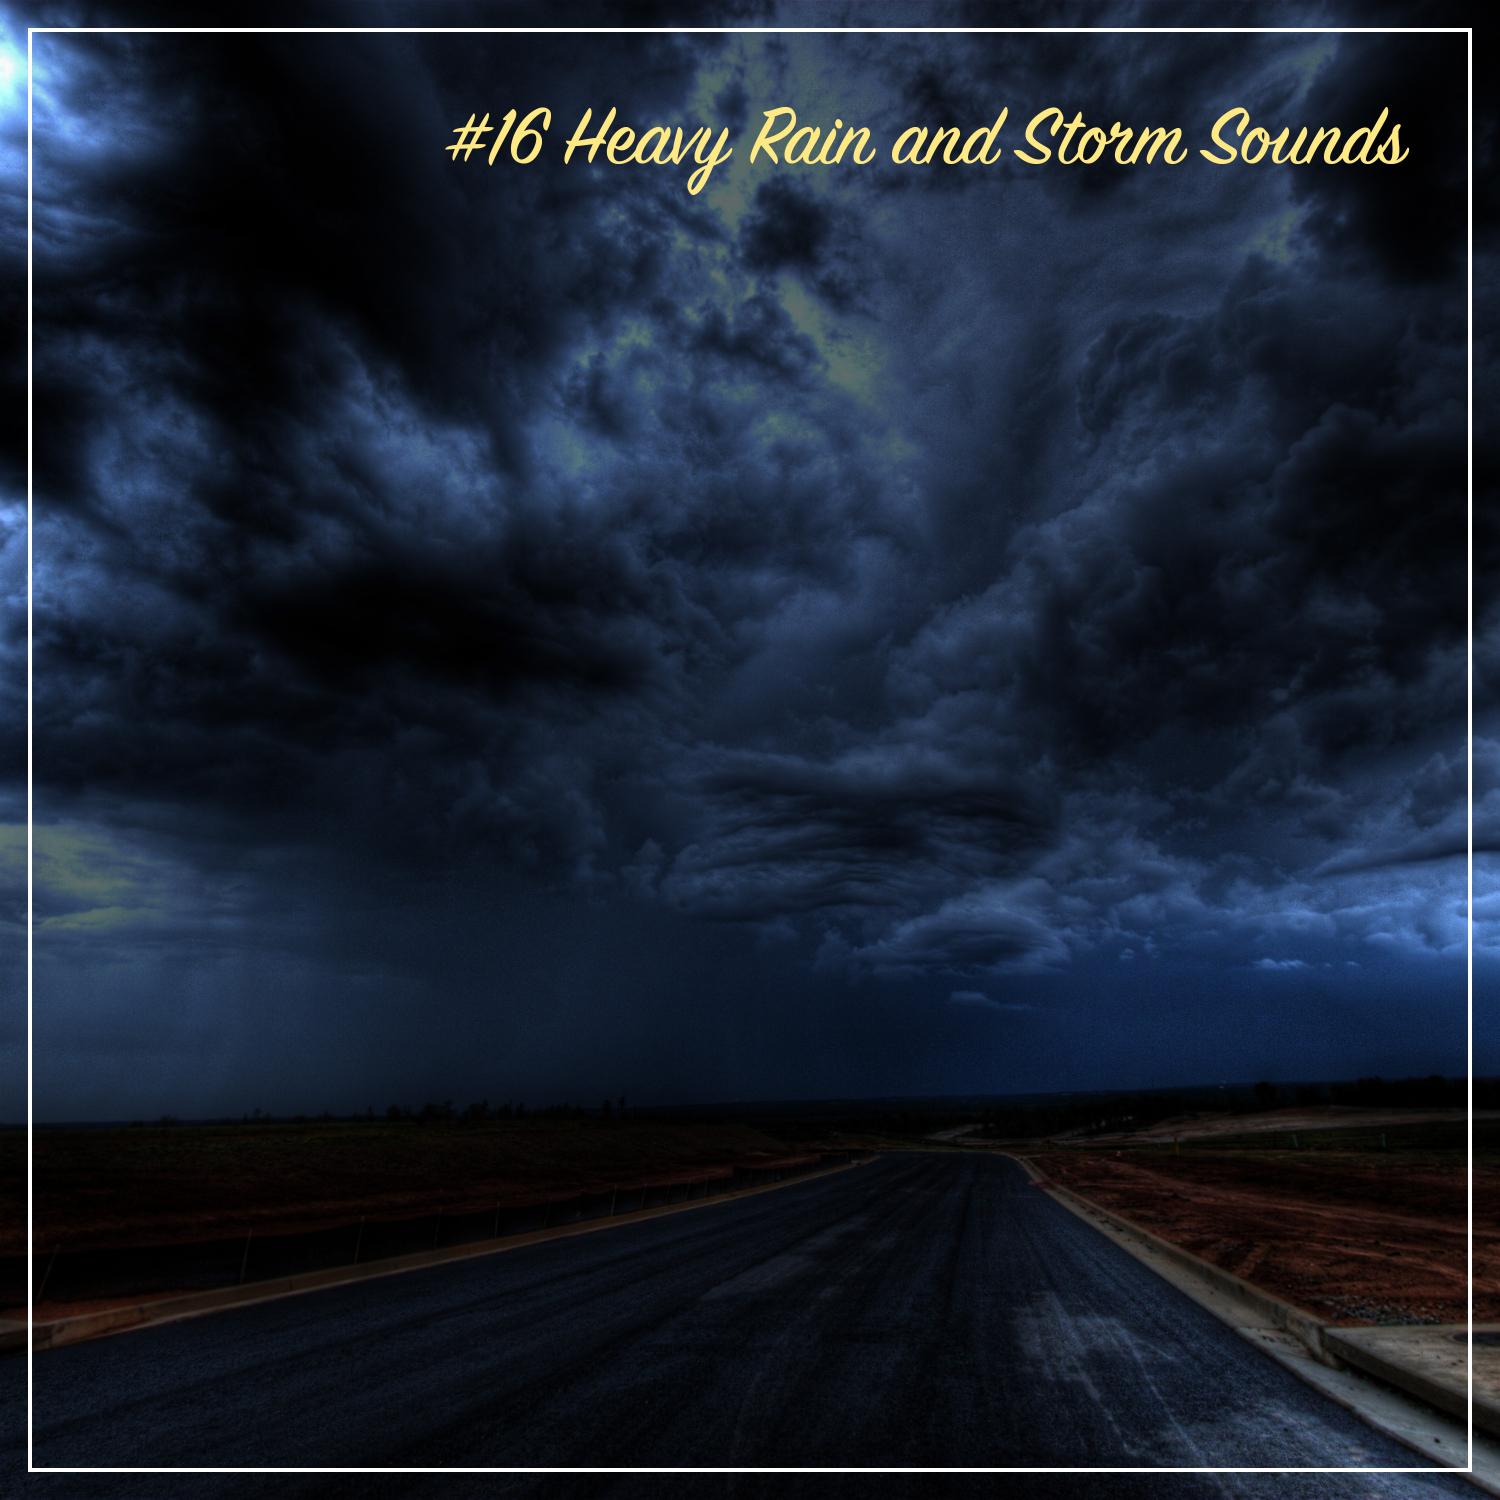 #16 Heavy Rain and Storm Sounds - City and Countryside Rain